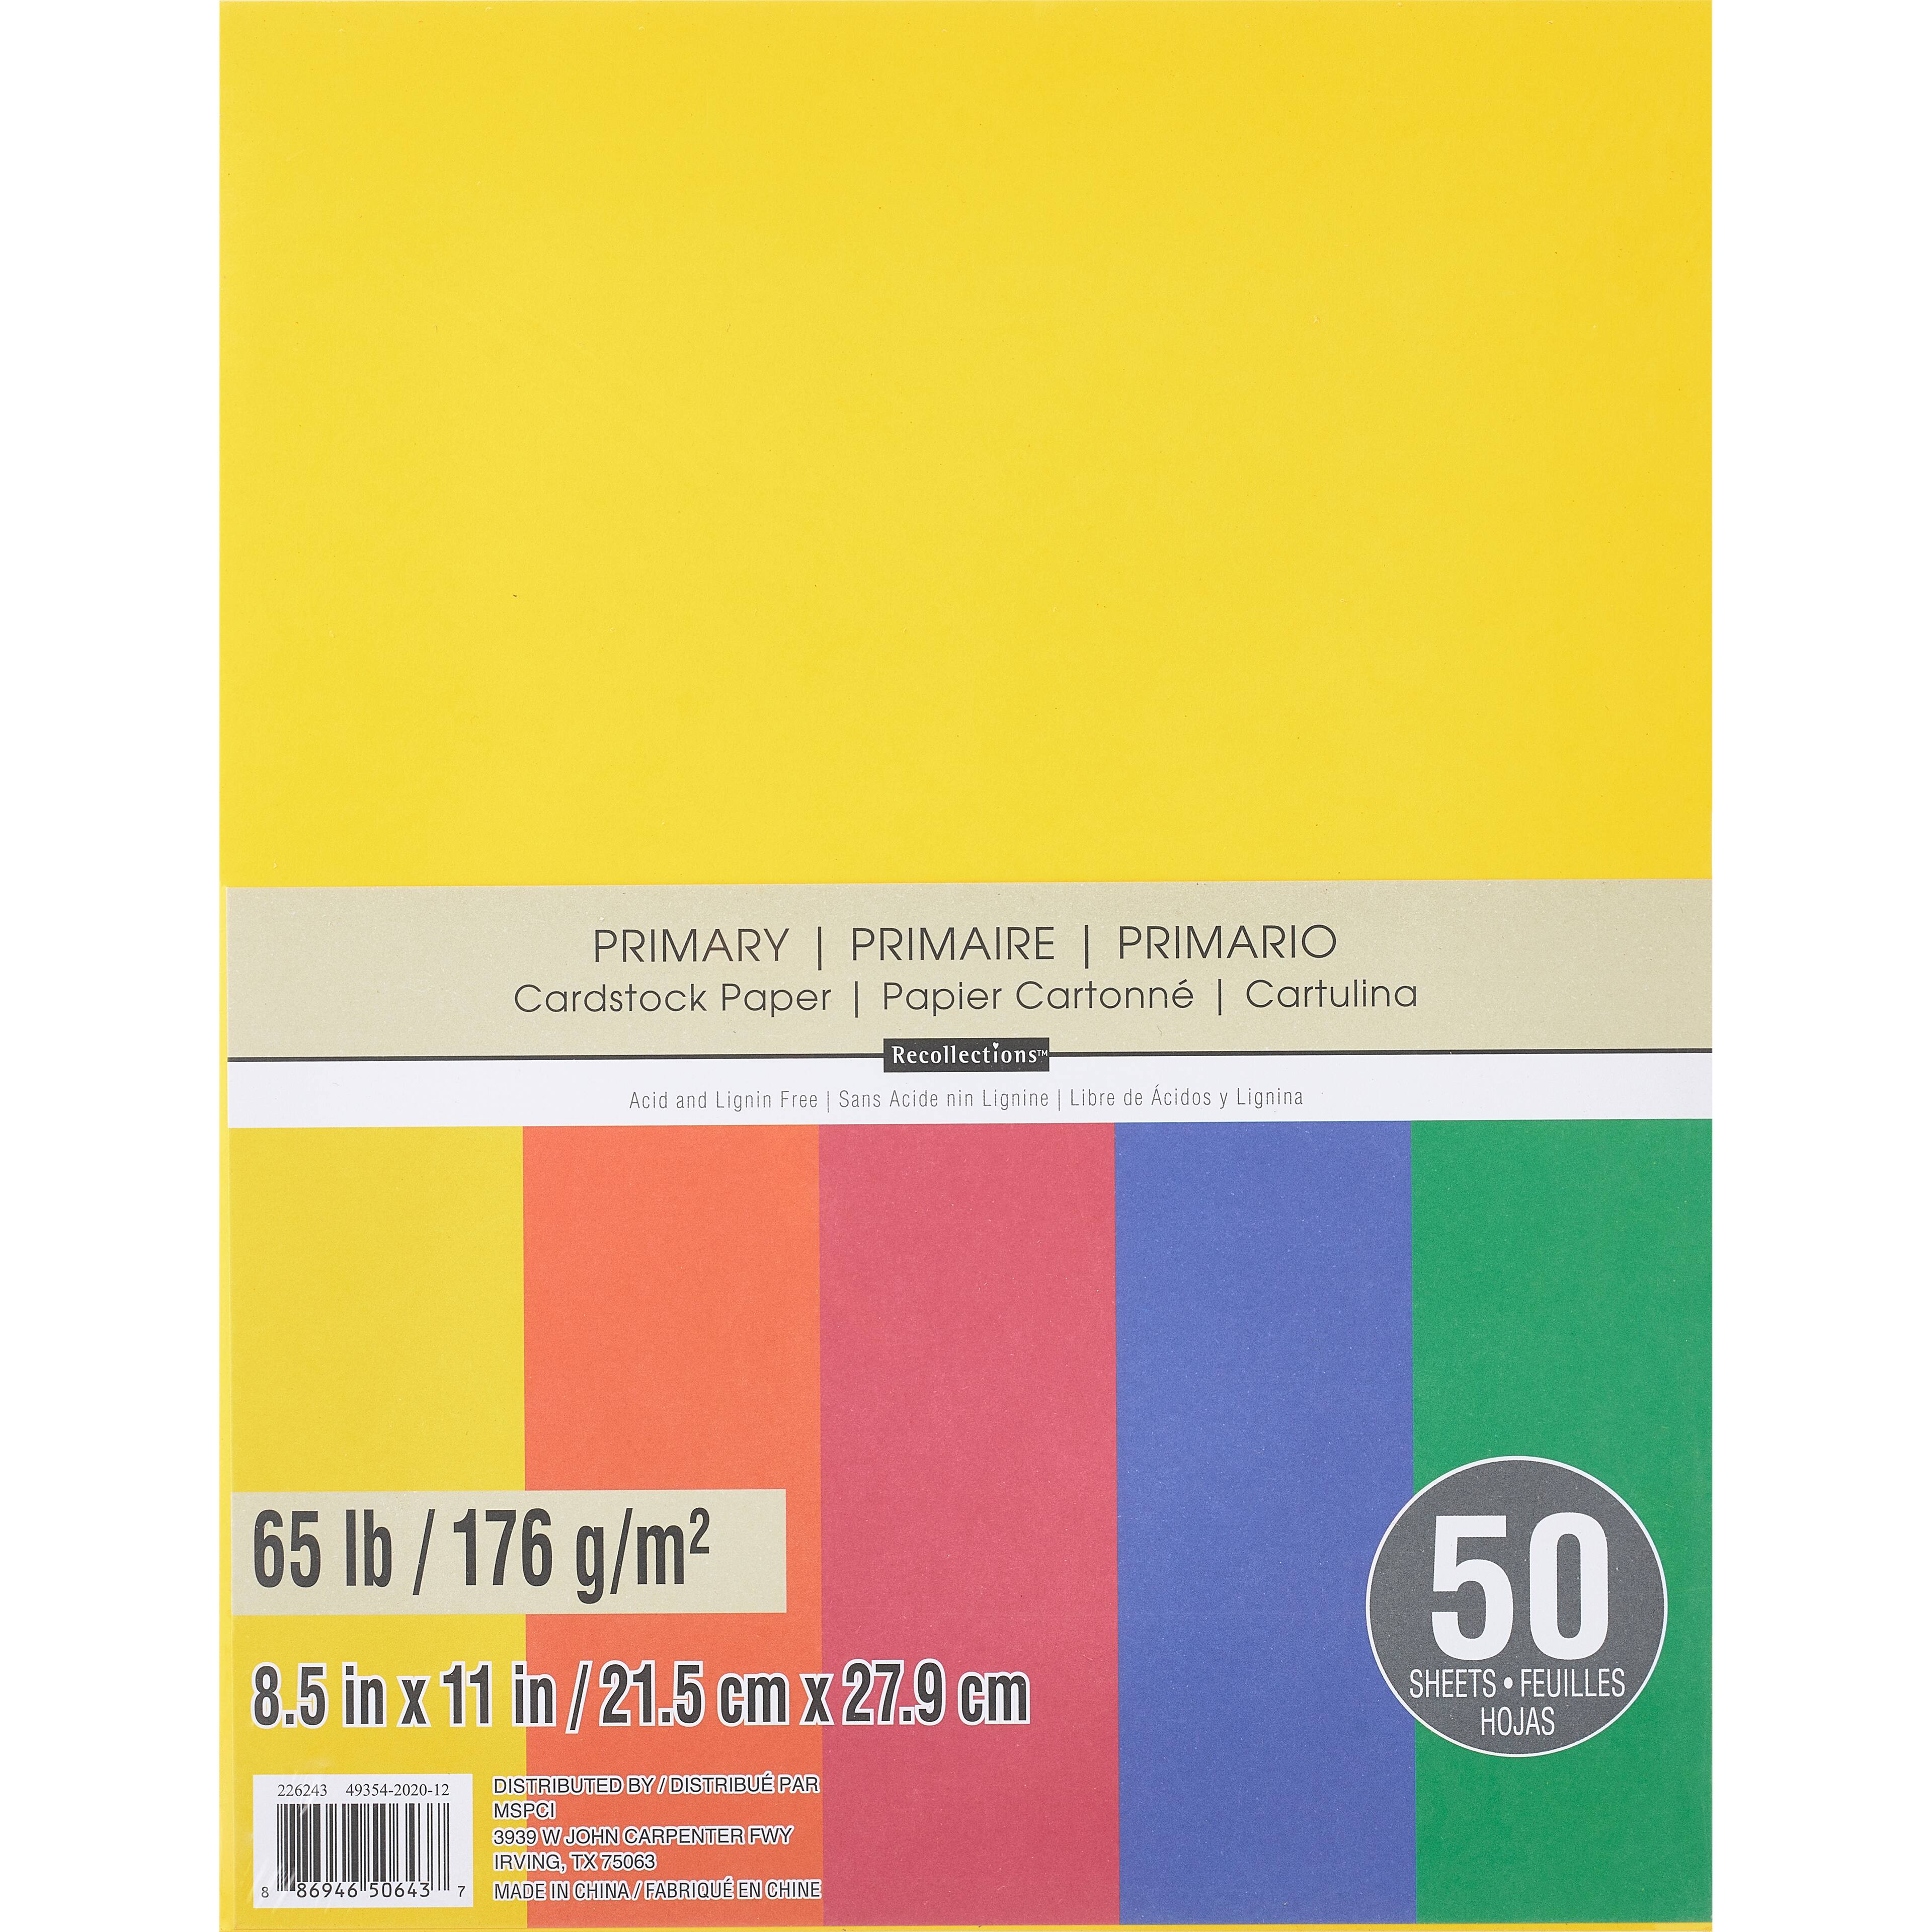 Recollections Cardstock Paper 8 1/2" x 11" 50 Sheets 65 lb single color BLACK 